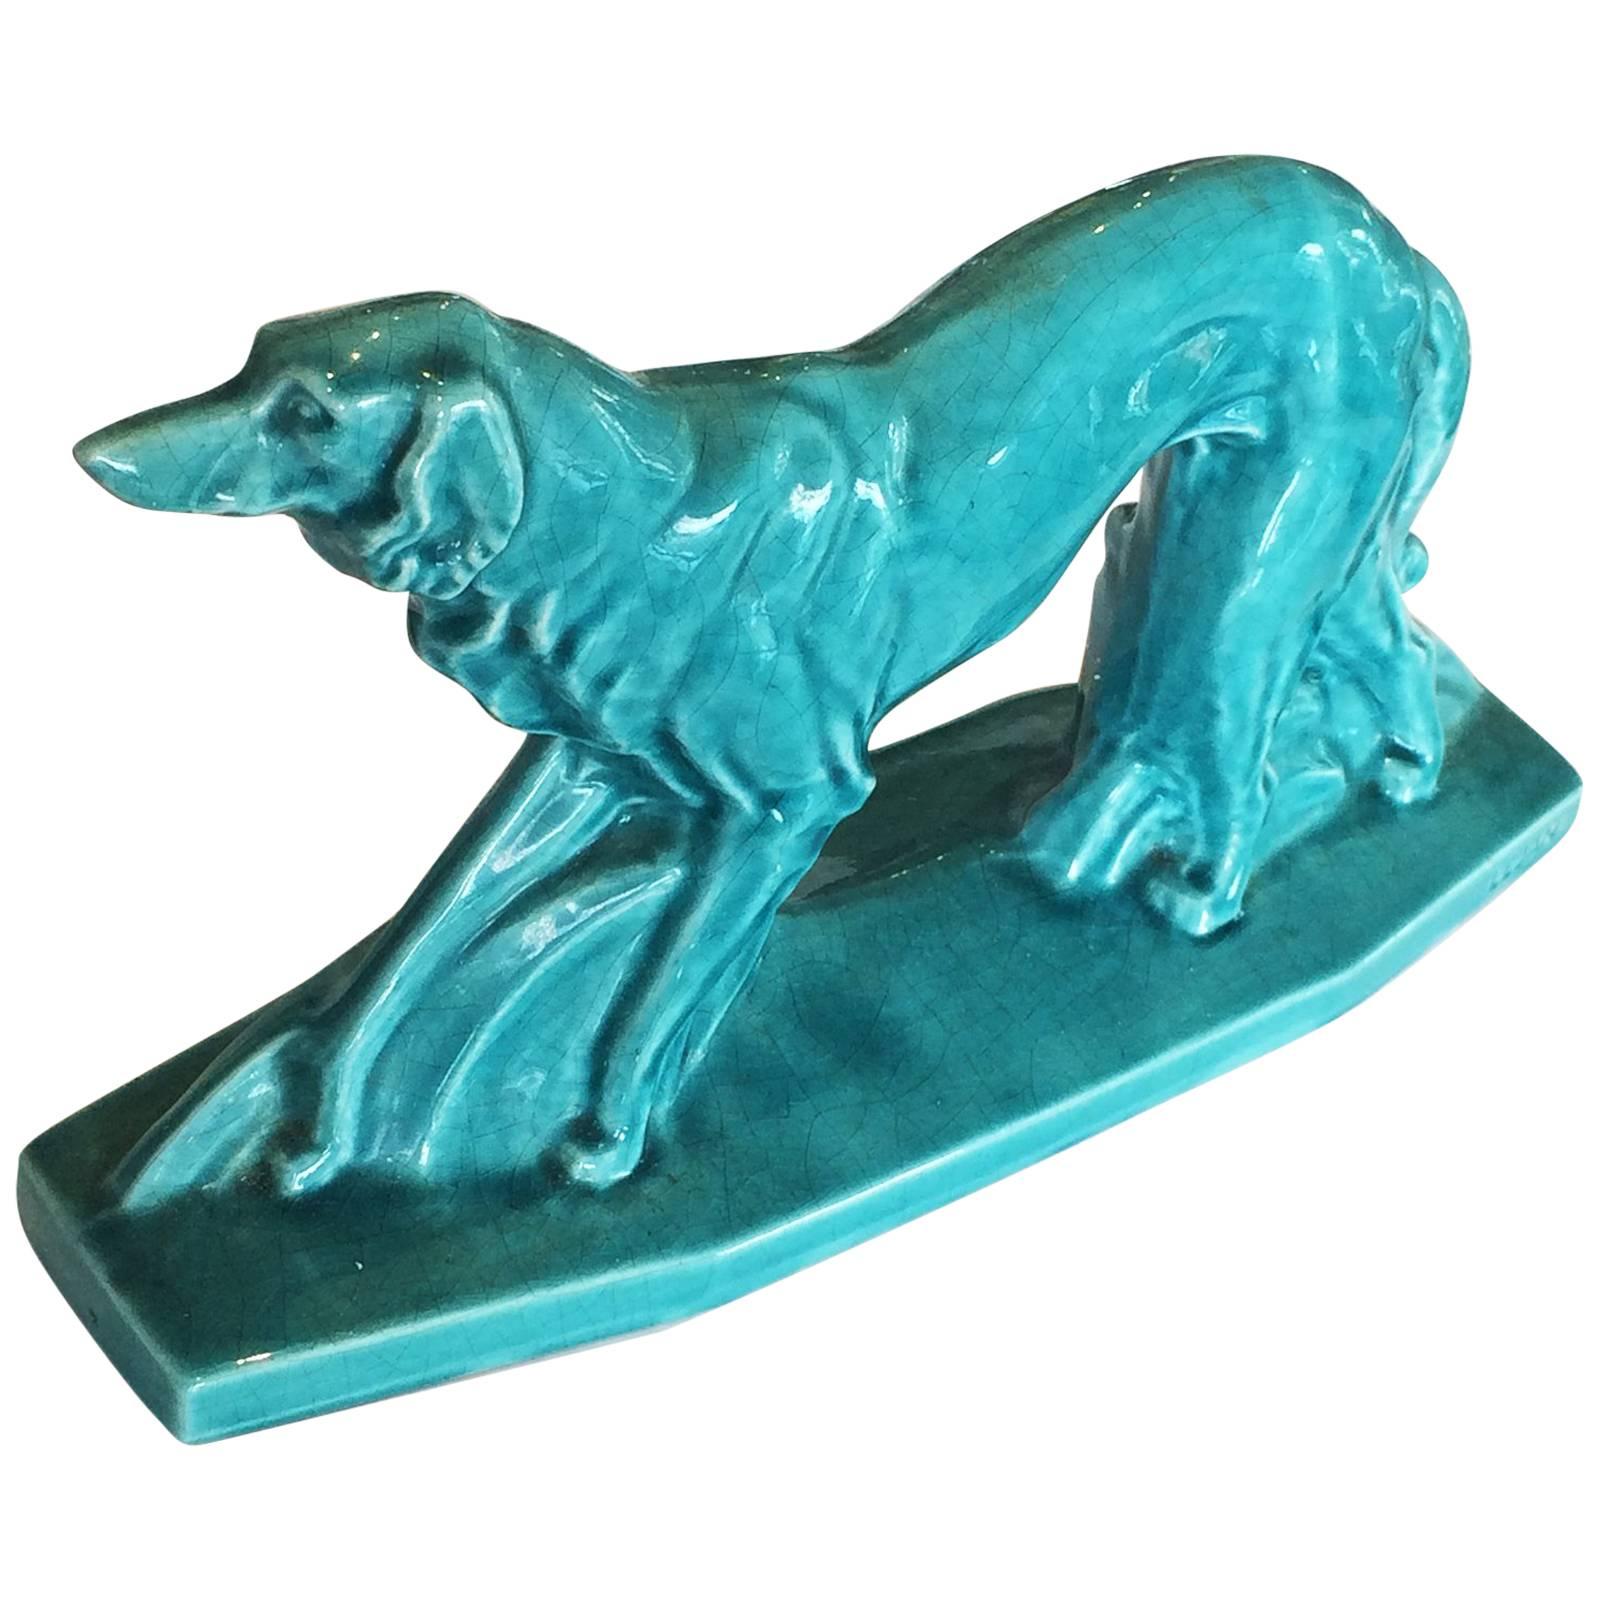 French Craquele Figure of a Borzoi the Art Deco Dog Signed by LeJan